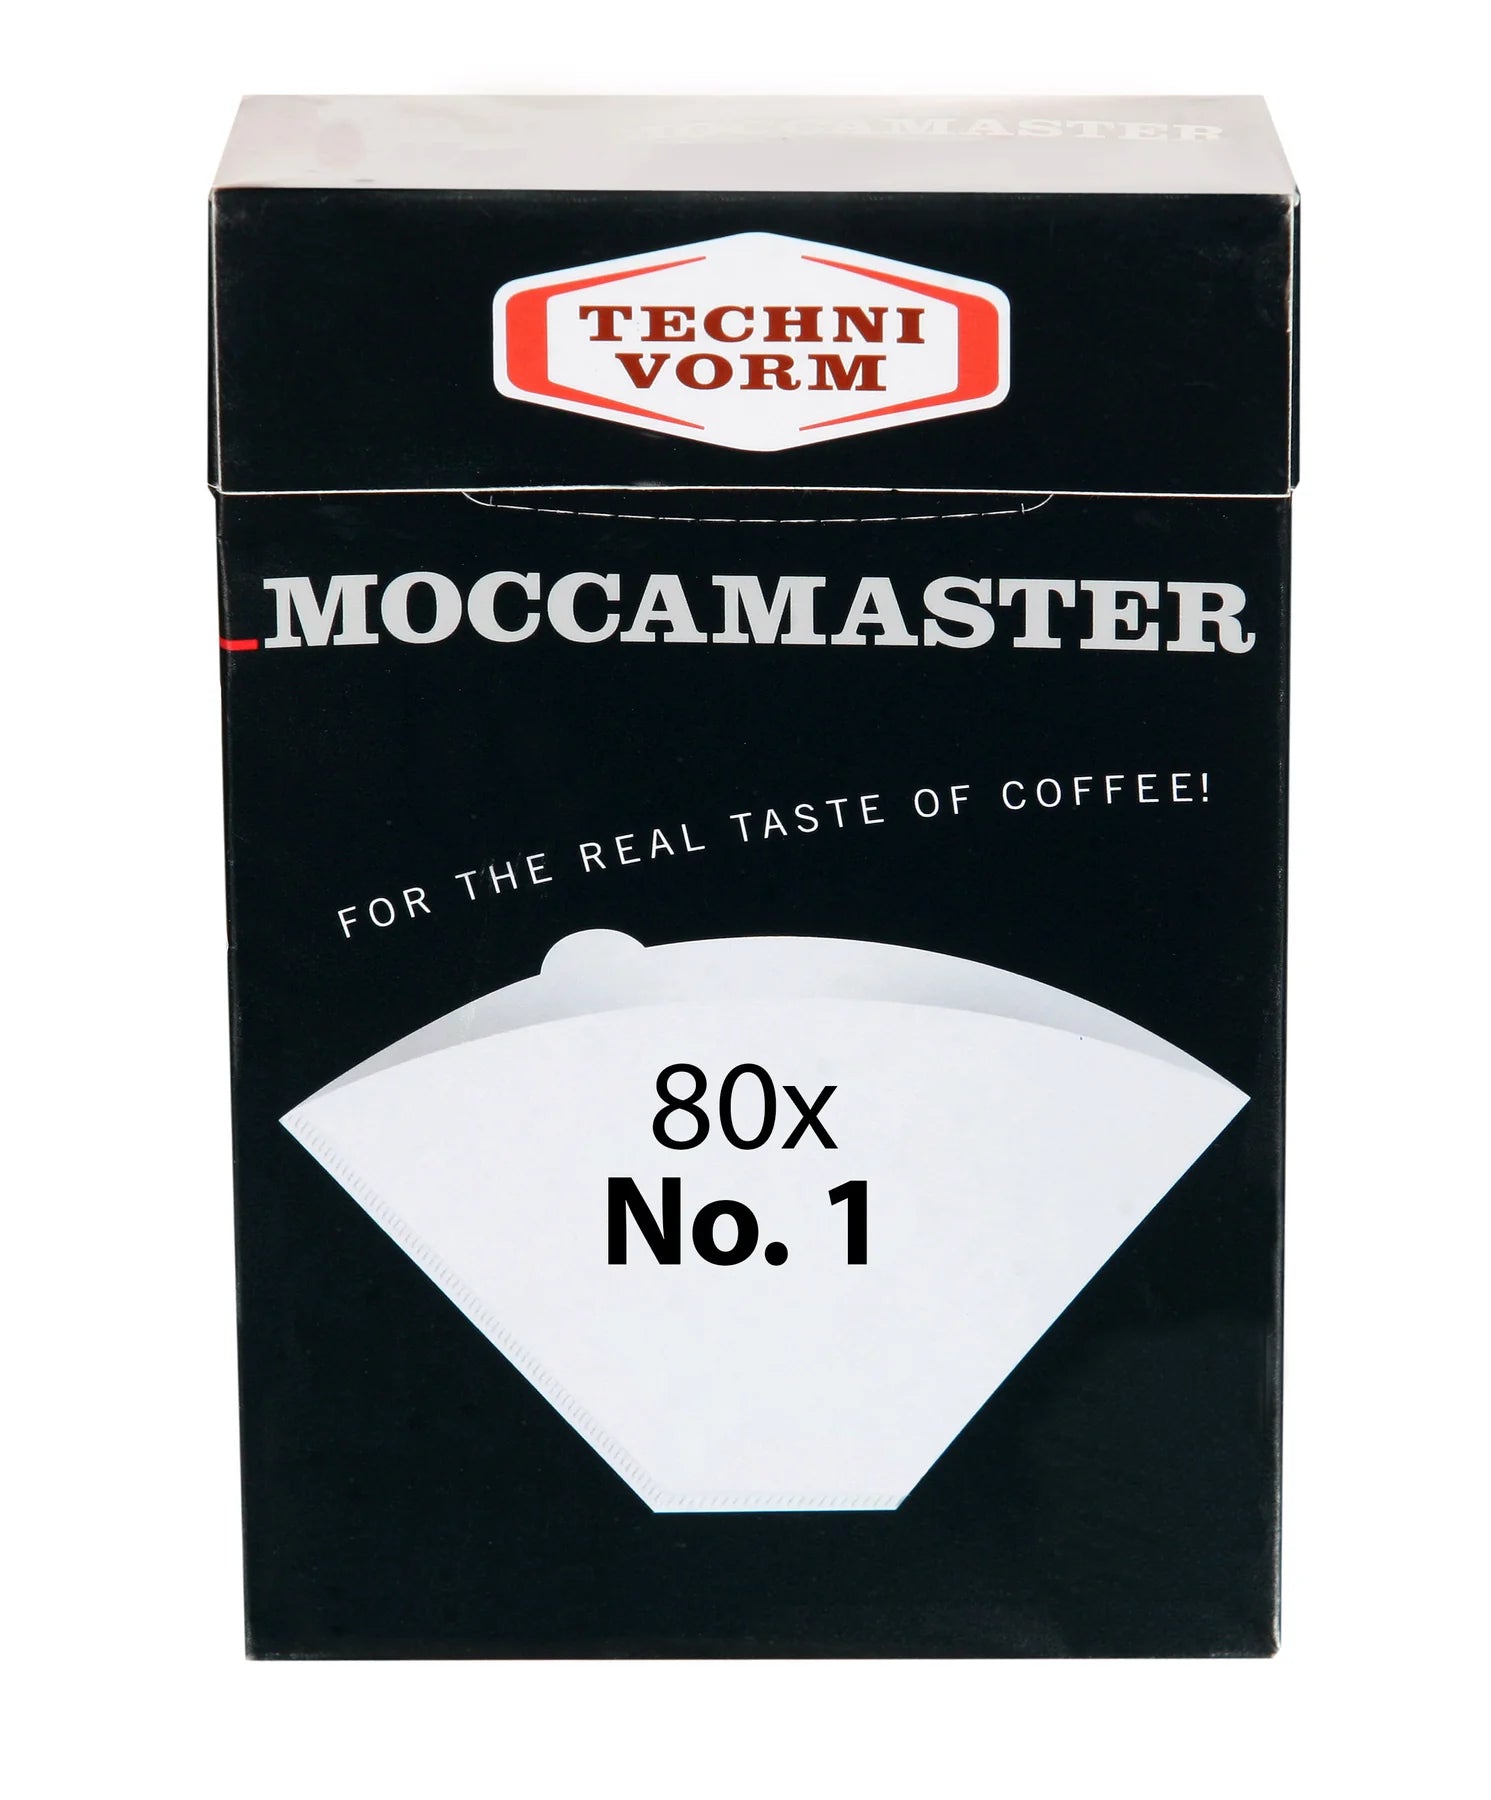 Technivorm Moccamaster 79317 KBGT Thermal Carafe 10-Cup Coffee Maker 40 Ounce, Stone Grey 1.25L